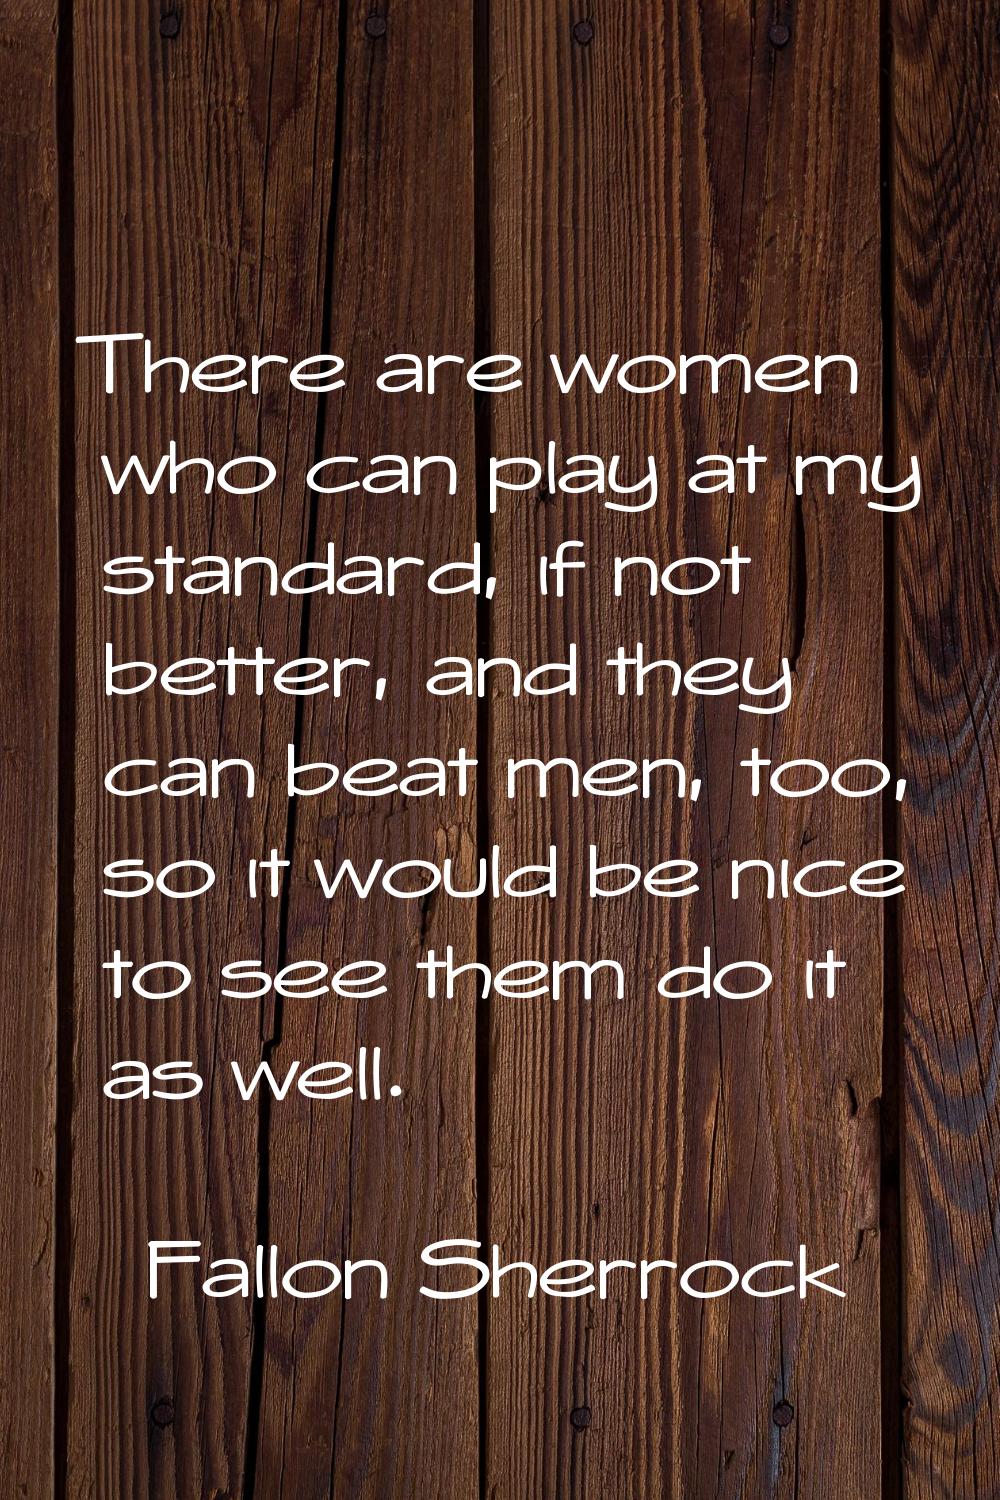 There are women who can play at my standard, if not better, and they can beat men, too, so it would